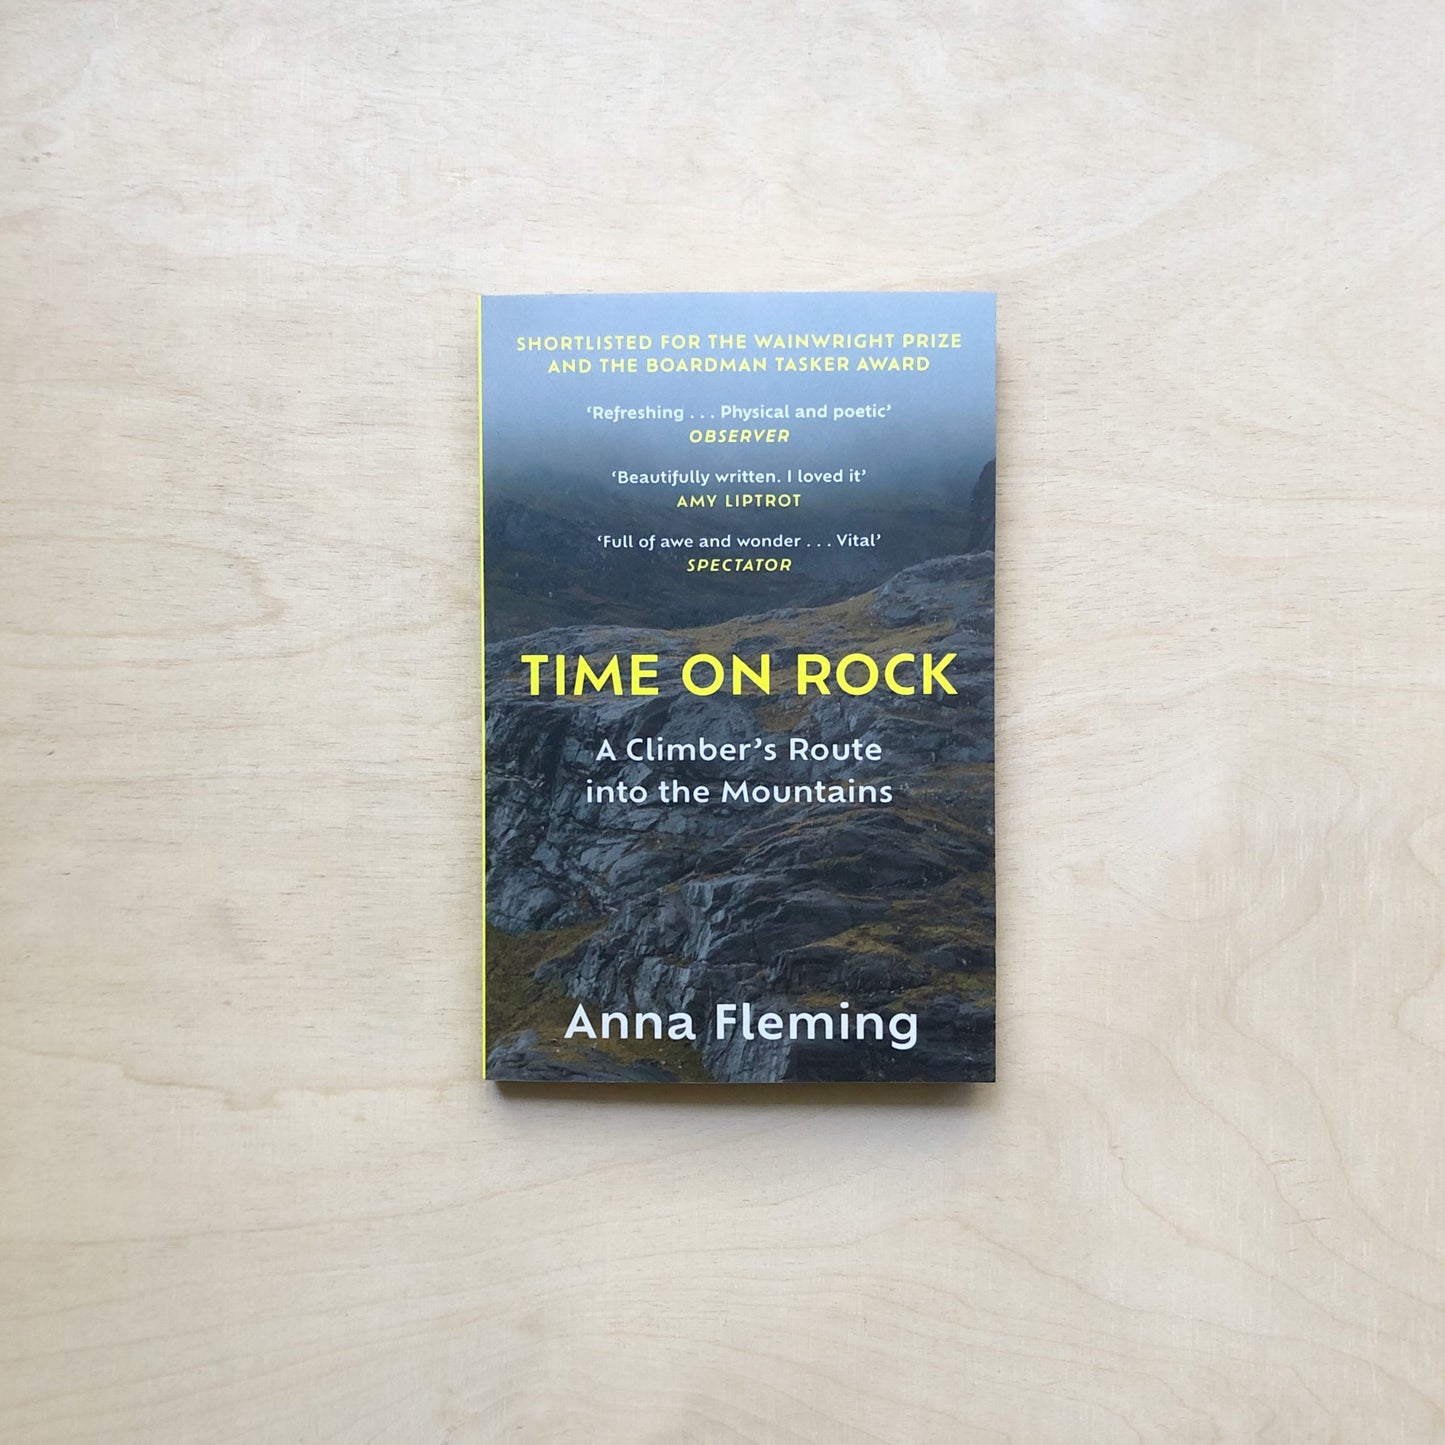 Time on Rock - A Climber's Route into the Mountains